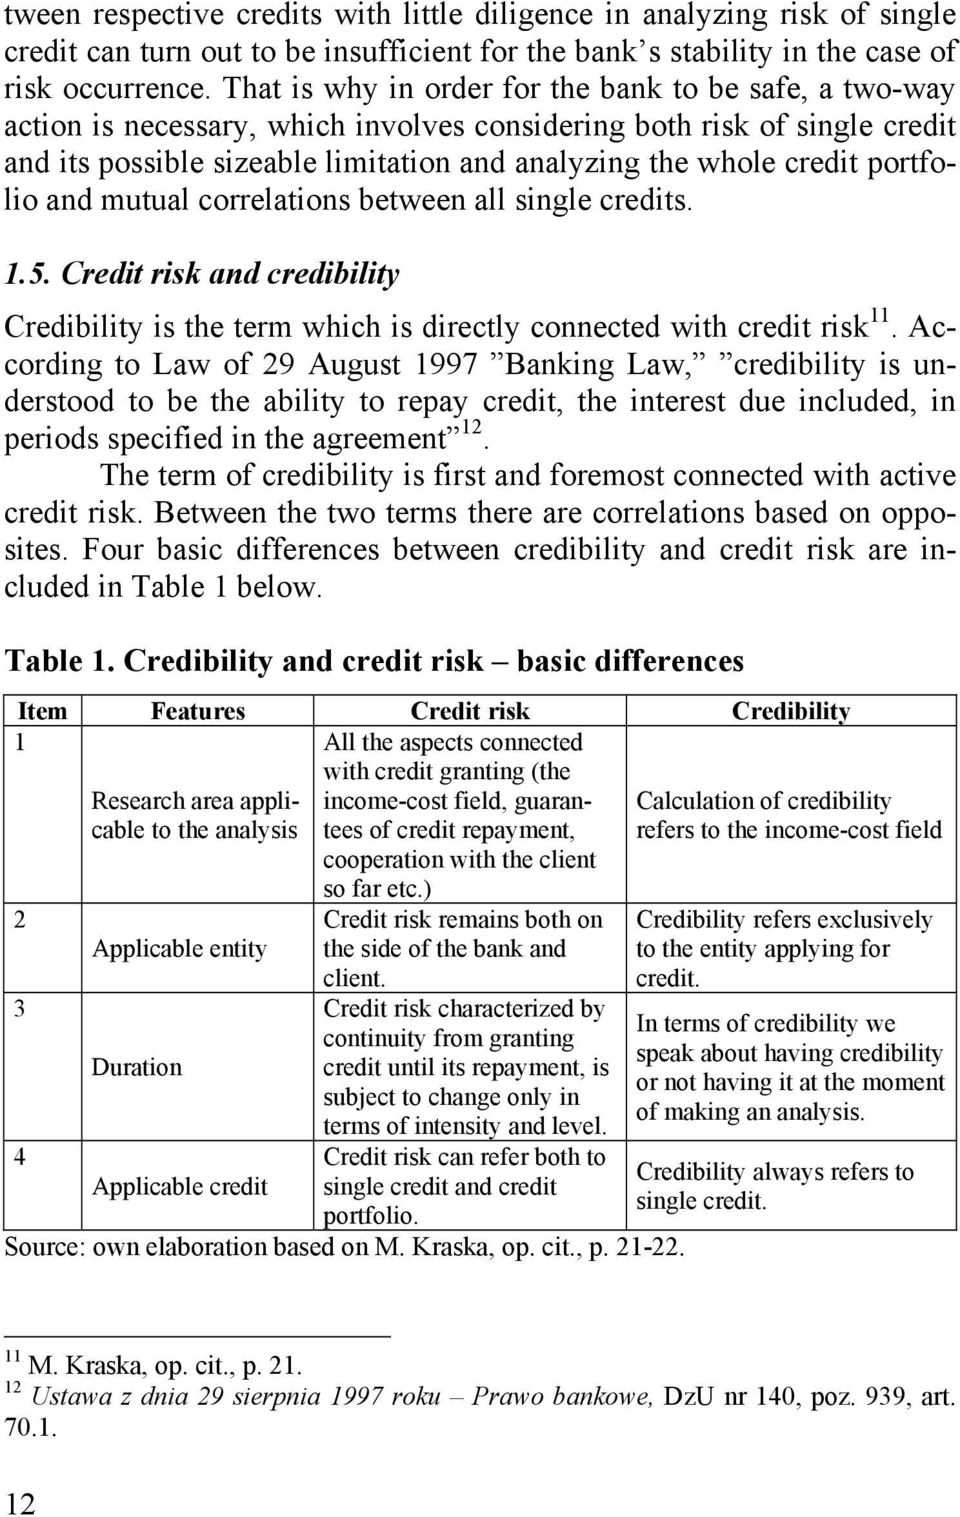 portfolio and mutual correlations between all single credits. 1.5. Credit risk and credibility Credibility is the term which is directly connected with credit risk 11.